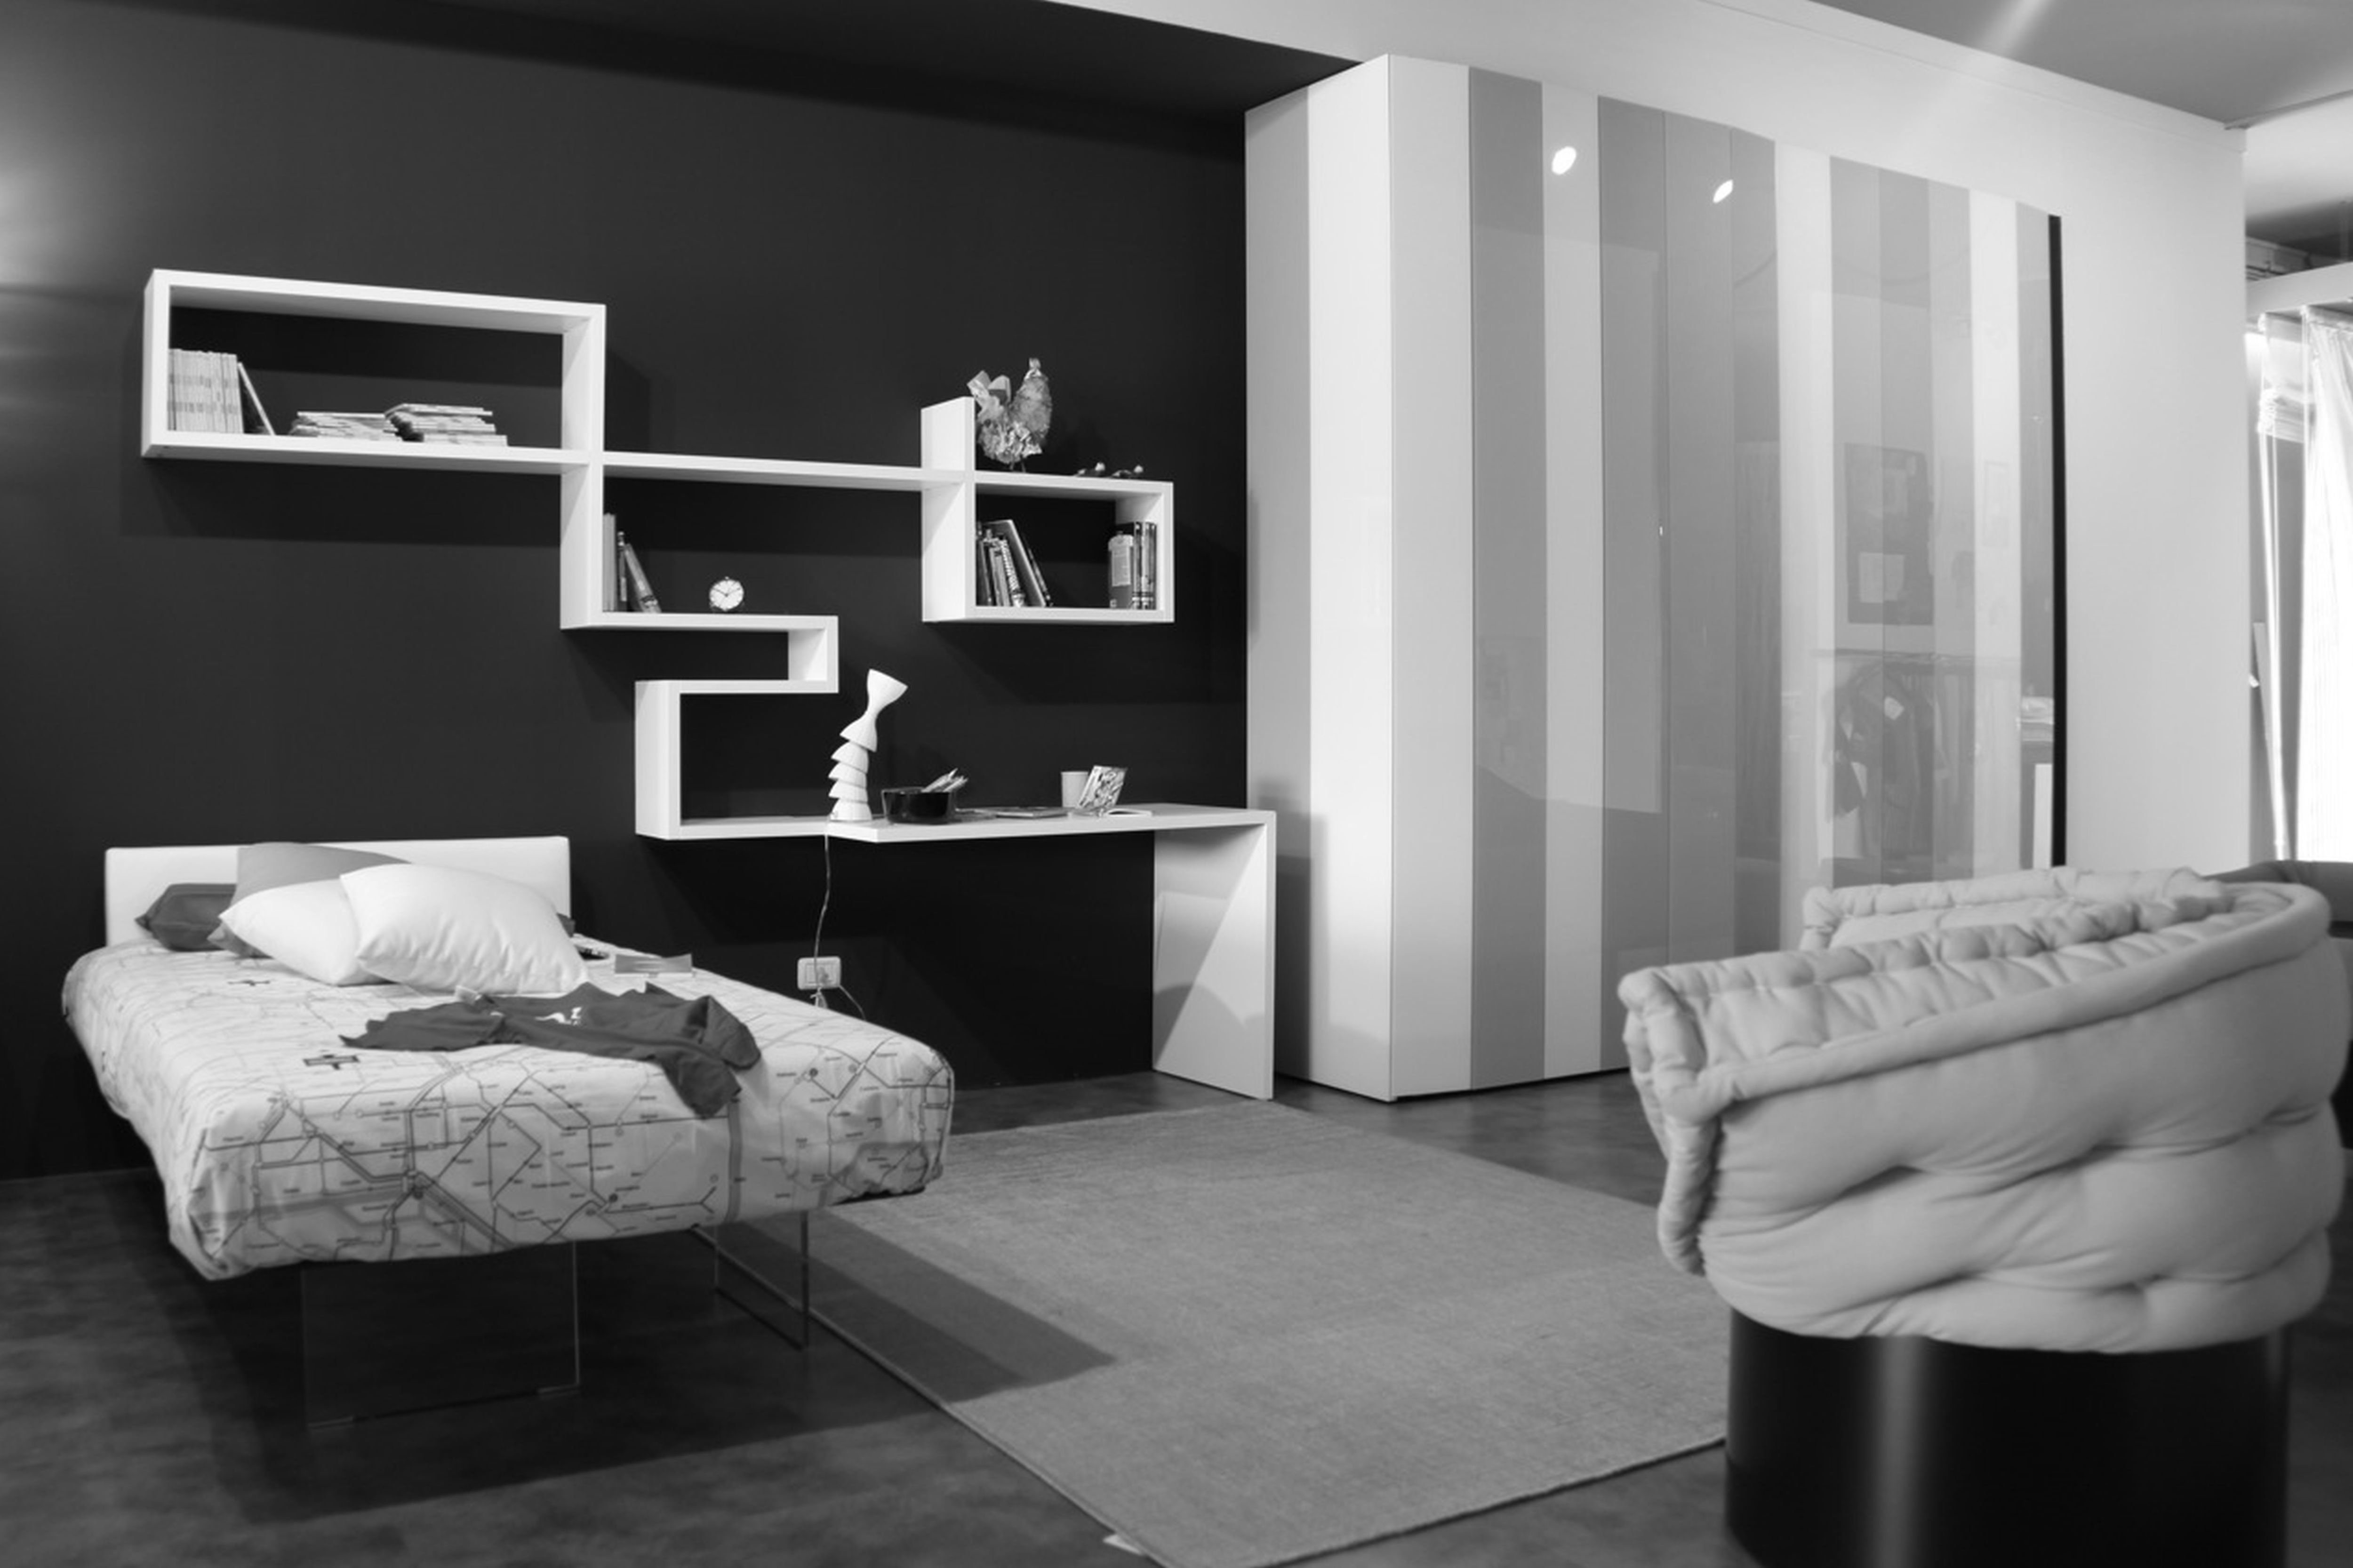 10 Ideal Black And White Painting Ideas bedroom outstanding cool paint ideas for boys room with black wall 2022